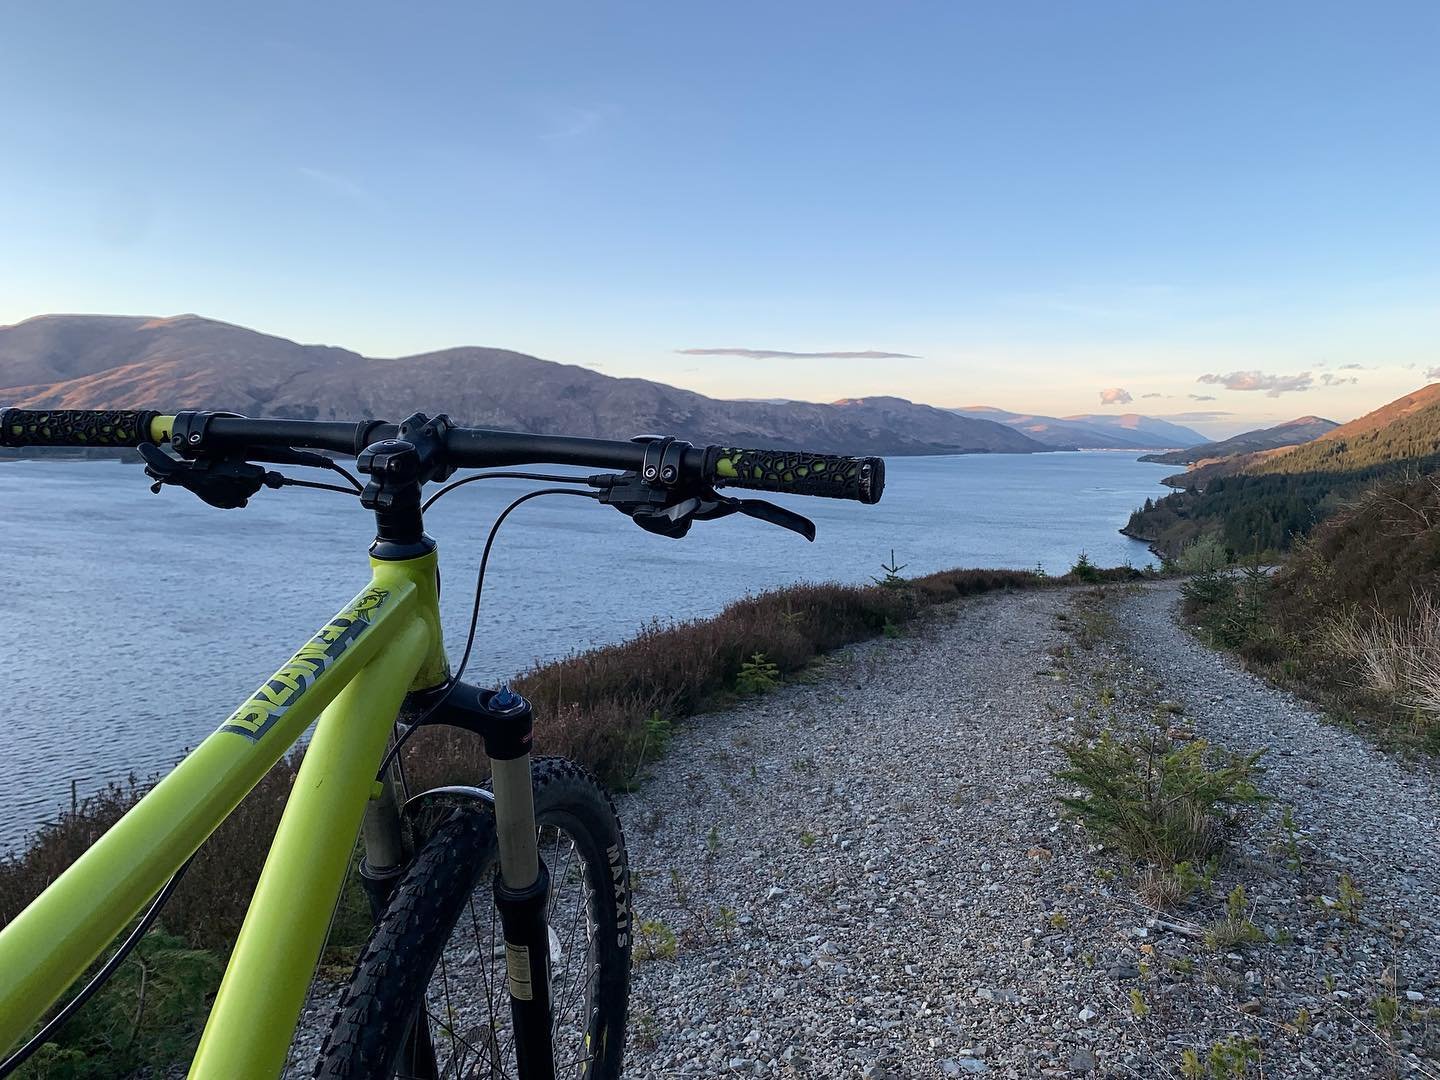 exploring the local trails and spectacular views along the way&hellip; 🚲 

#scottishhighlands #onich #besidetheloch #fortwilliam #fortwilliamscotland #summerbreaks #familyholidays #scottishselfcatering #highlandaccommodation #lochside #lochlinnhe #l